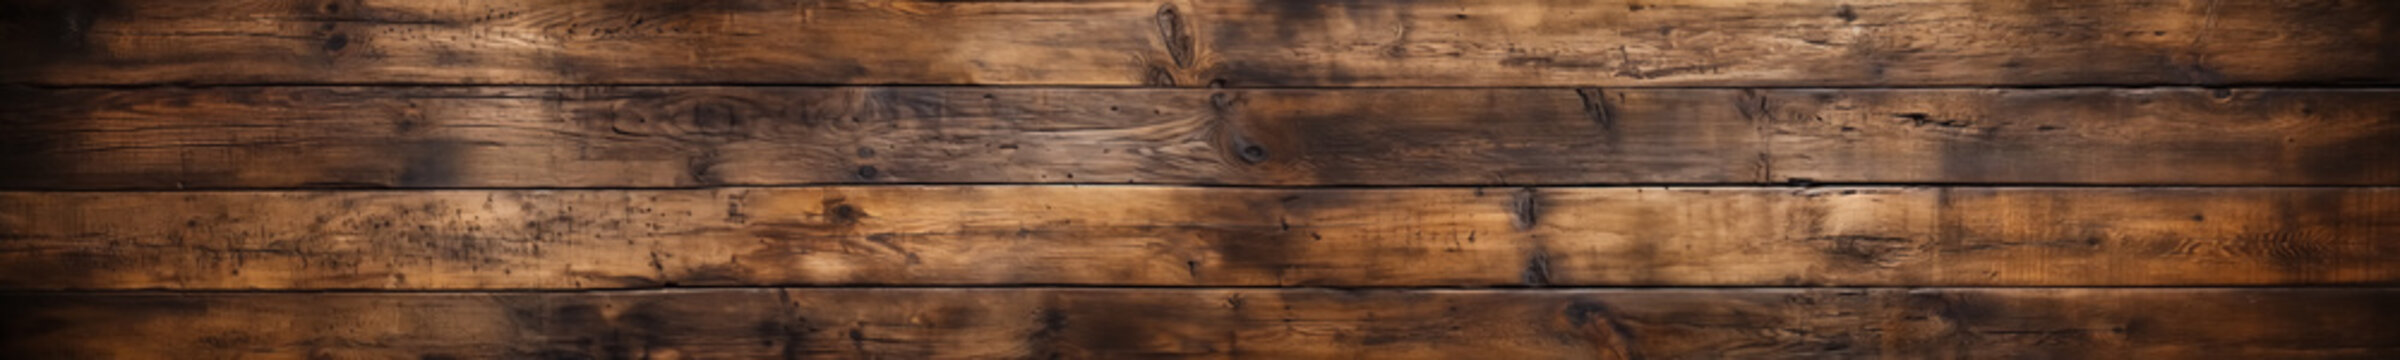 An image of an old wooden board as a background.
Can be used in web design to create a retro look or in graphic design for posters, effective banners in advertising, especially for products with a ret